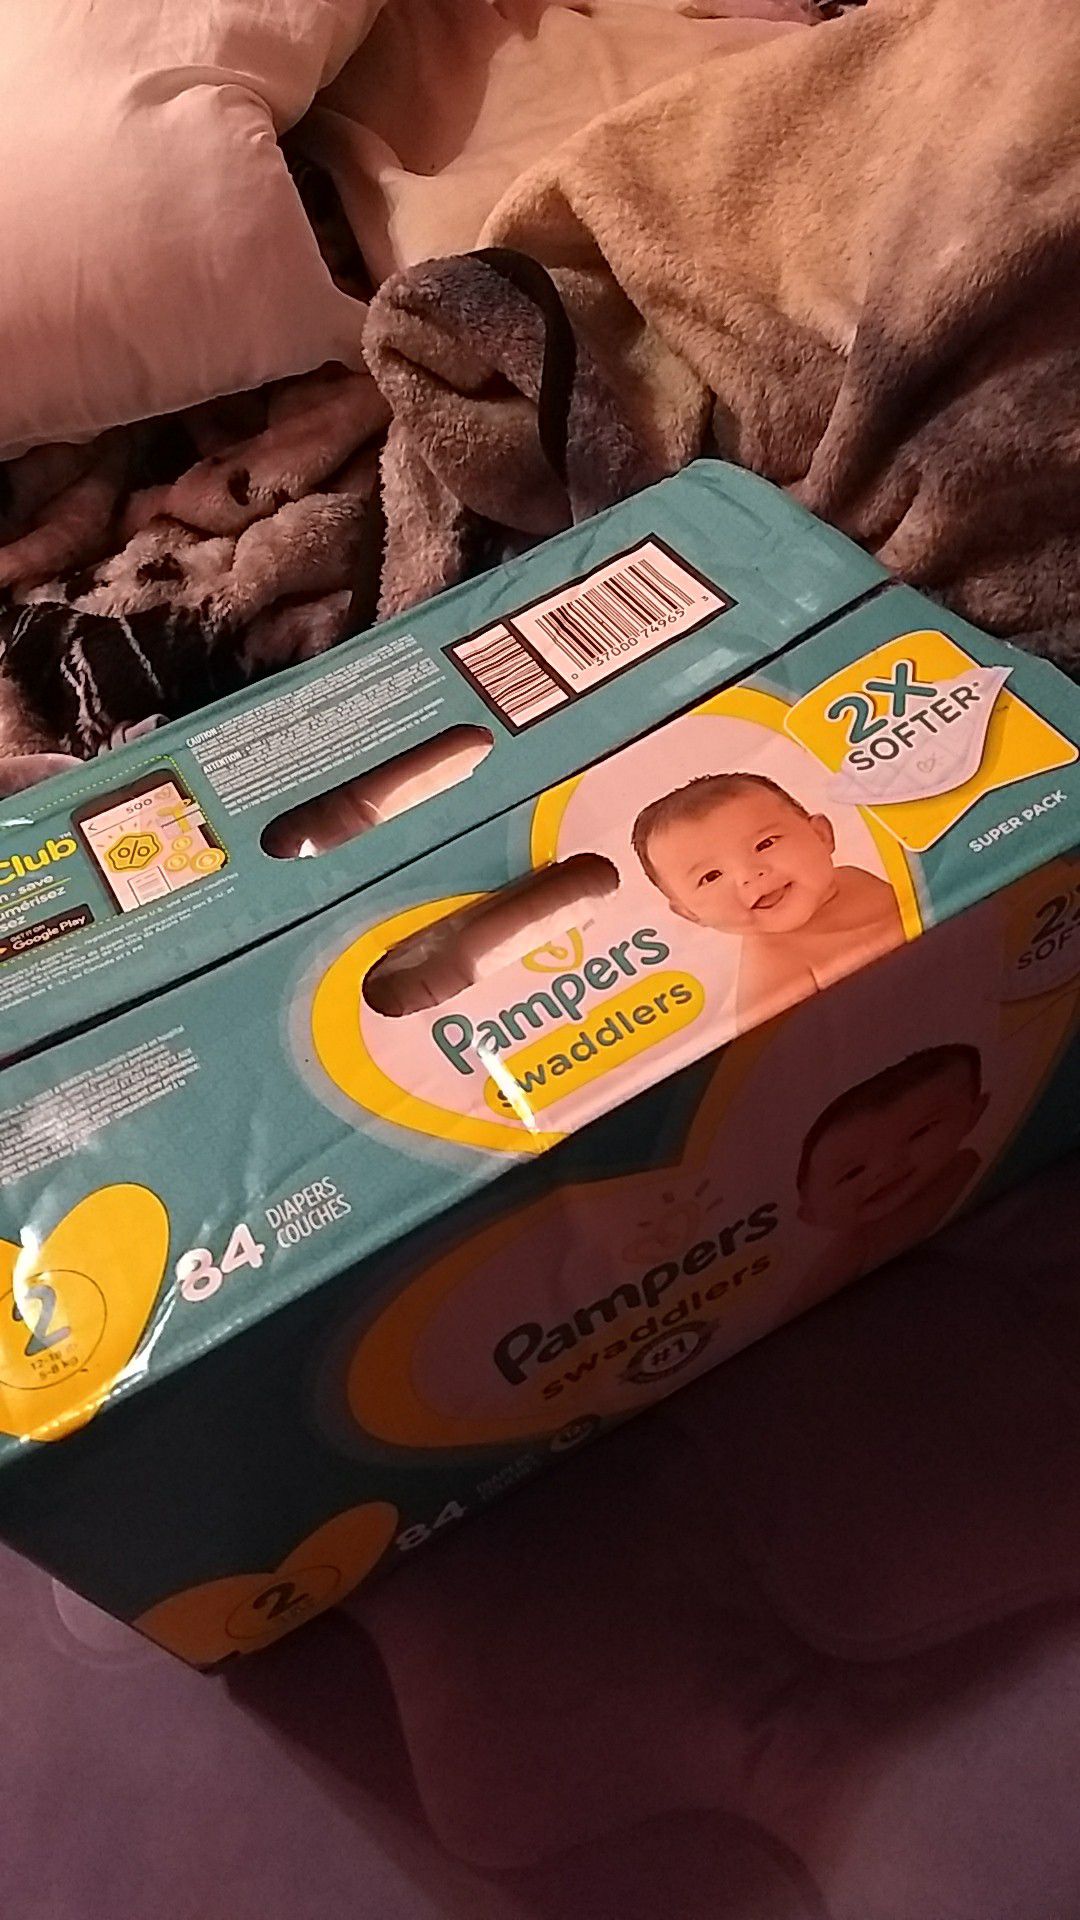 Pampers never used